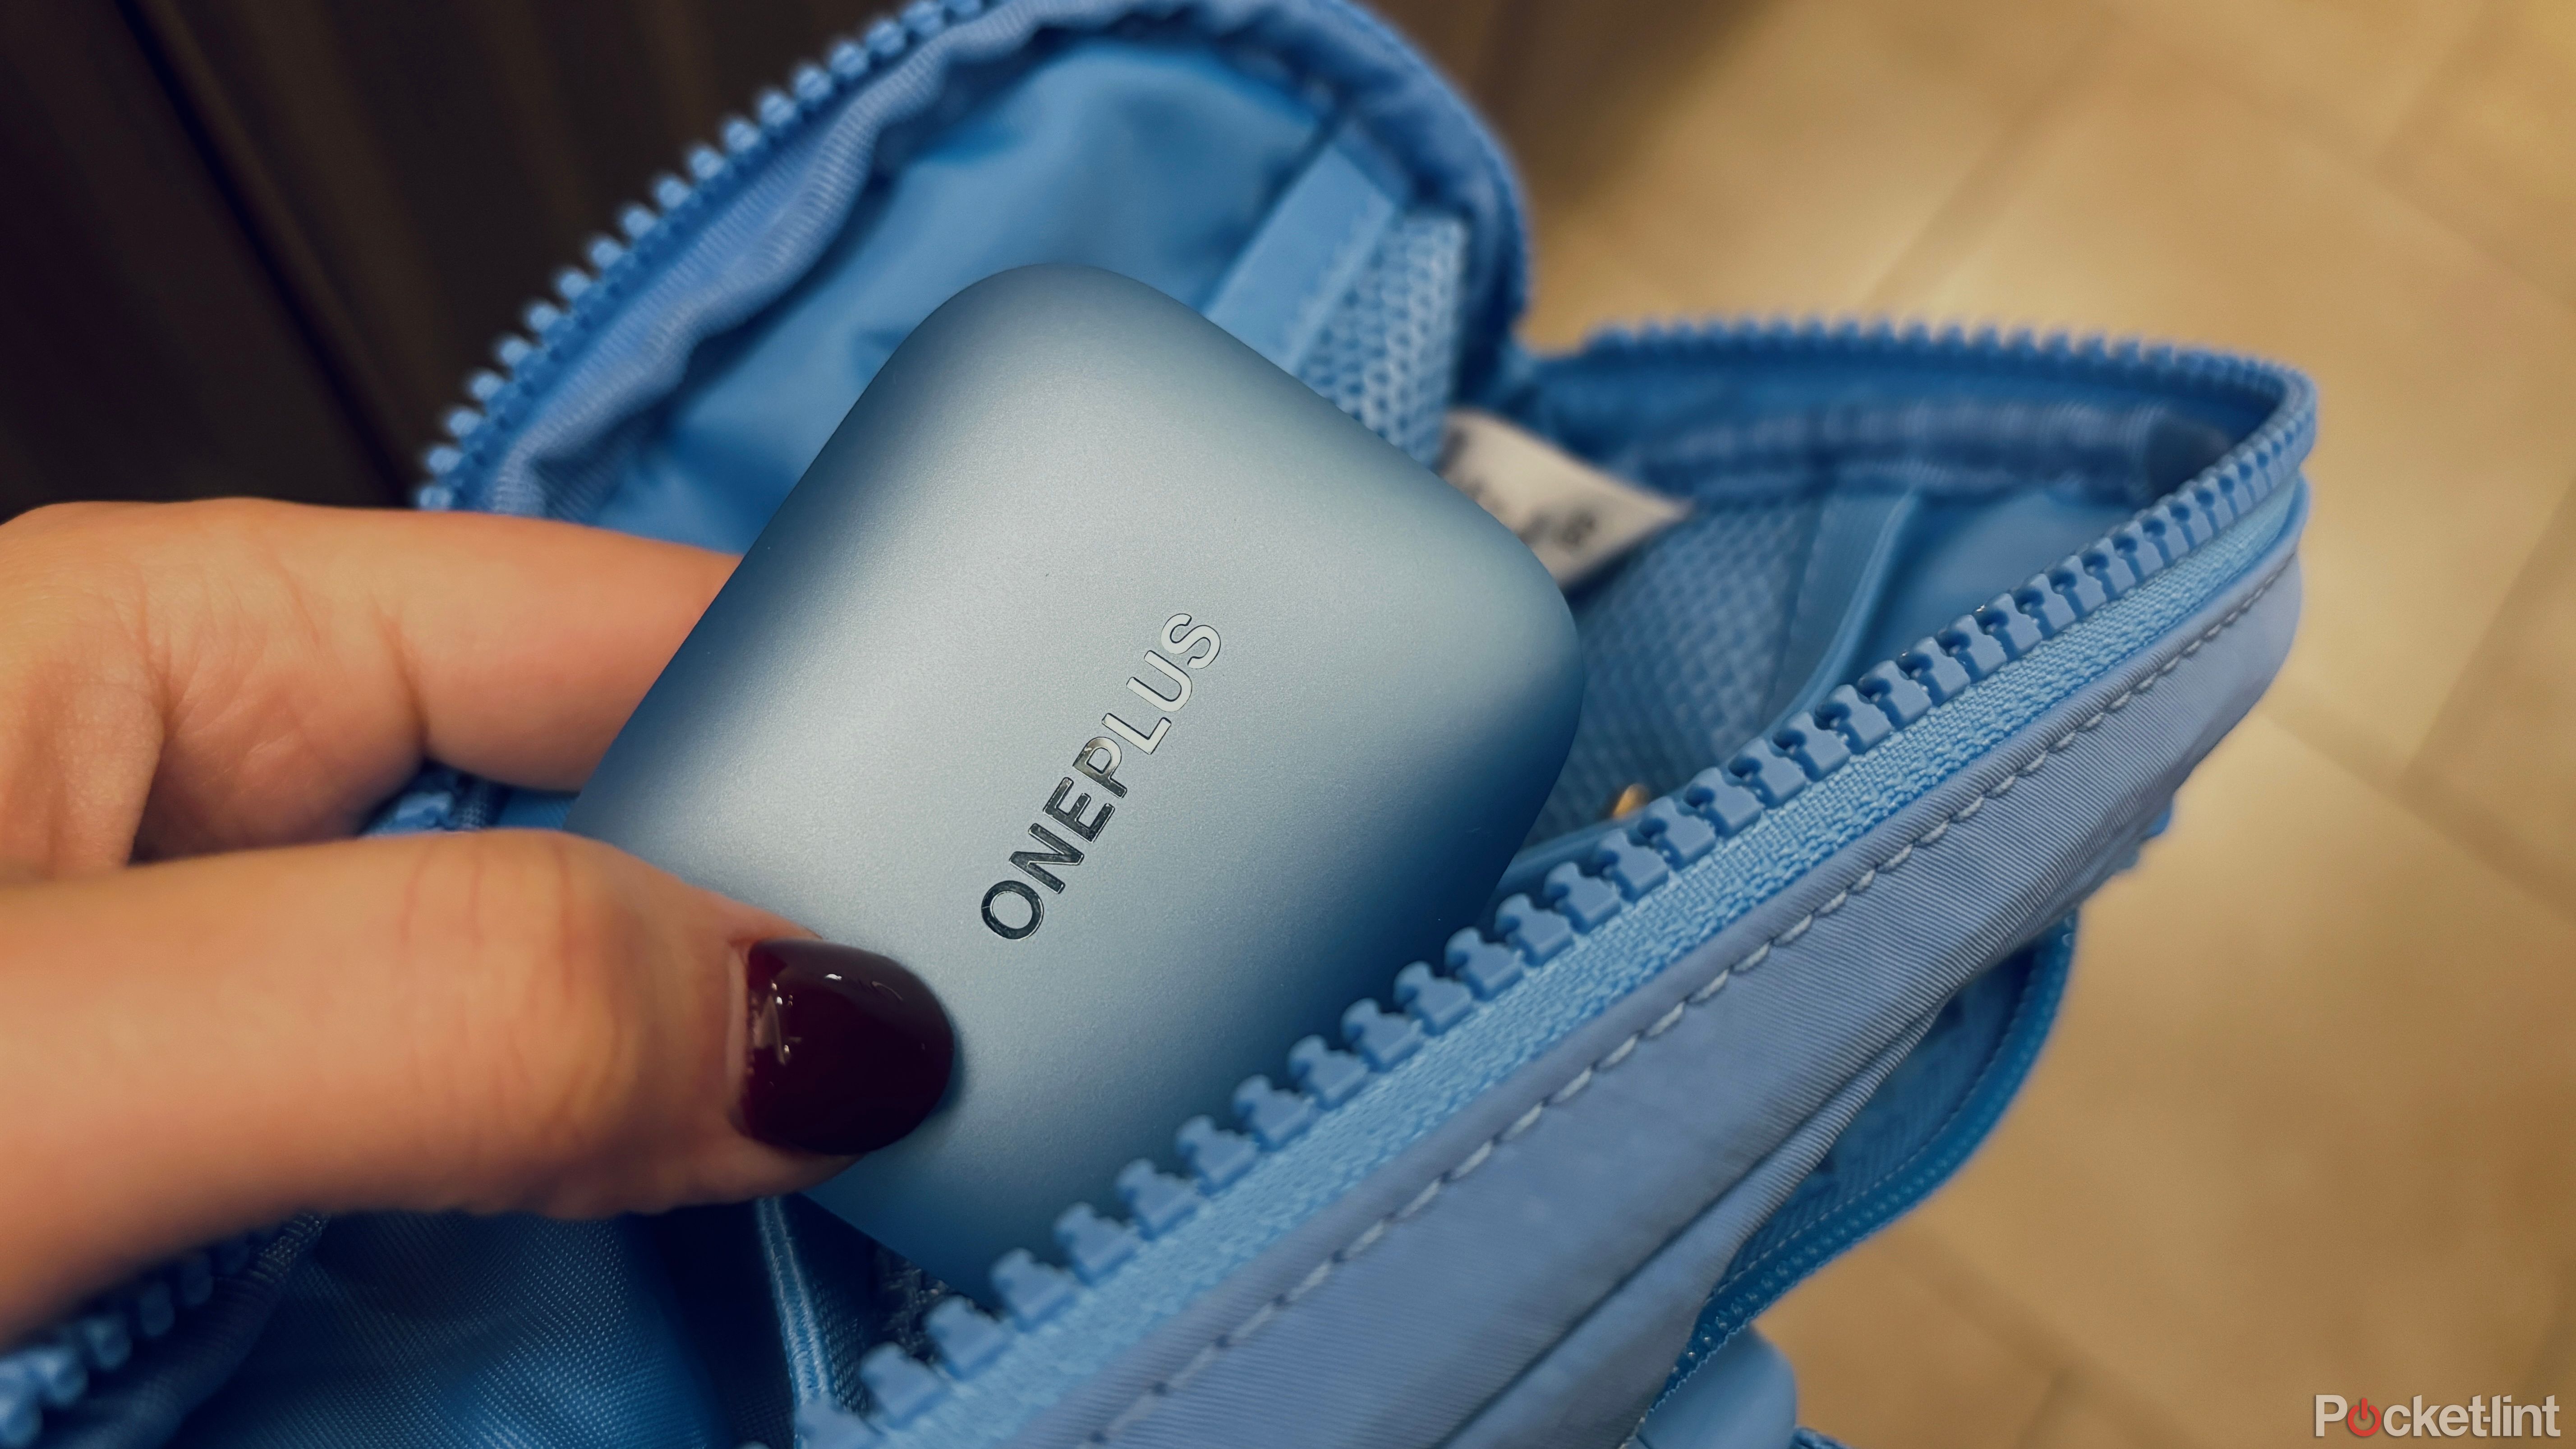 Putting OnePlus Buds 3 into blue workout bag